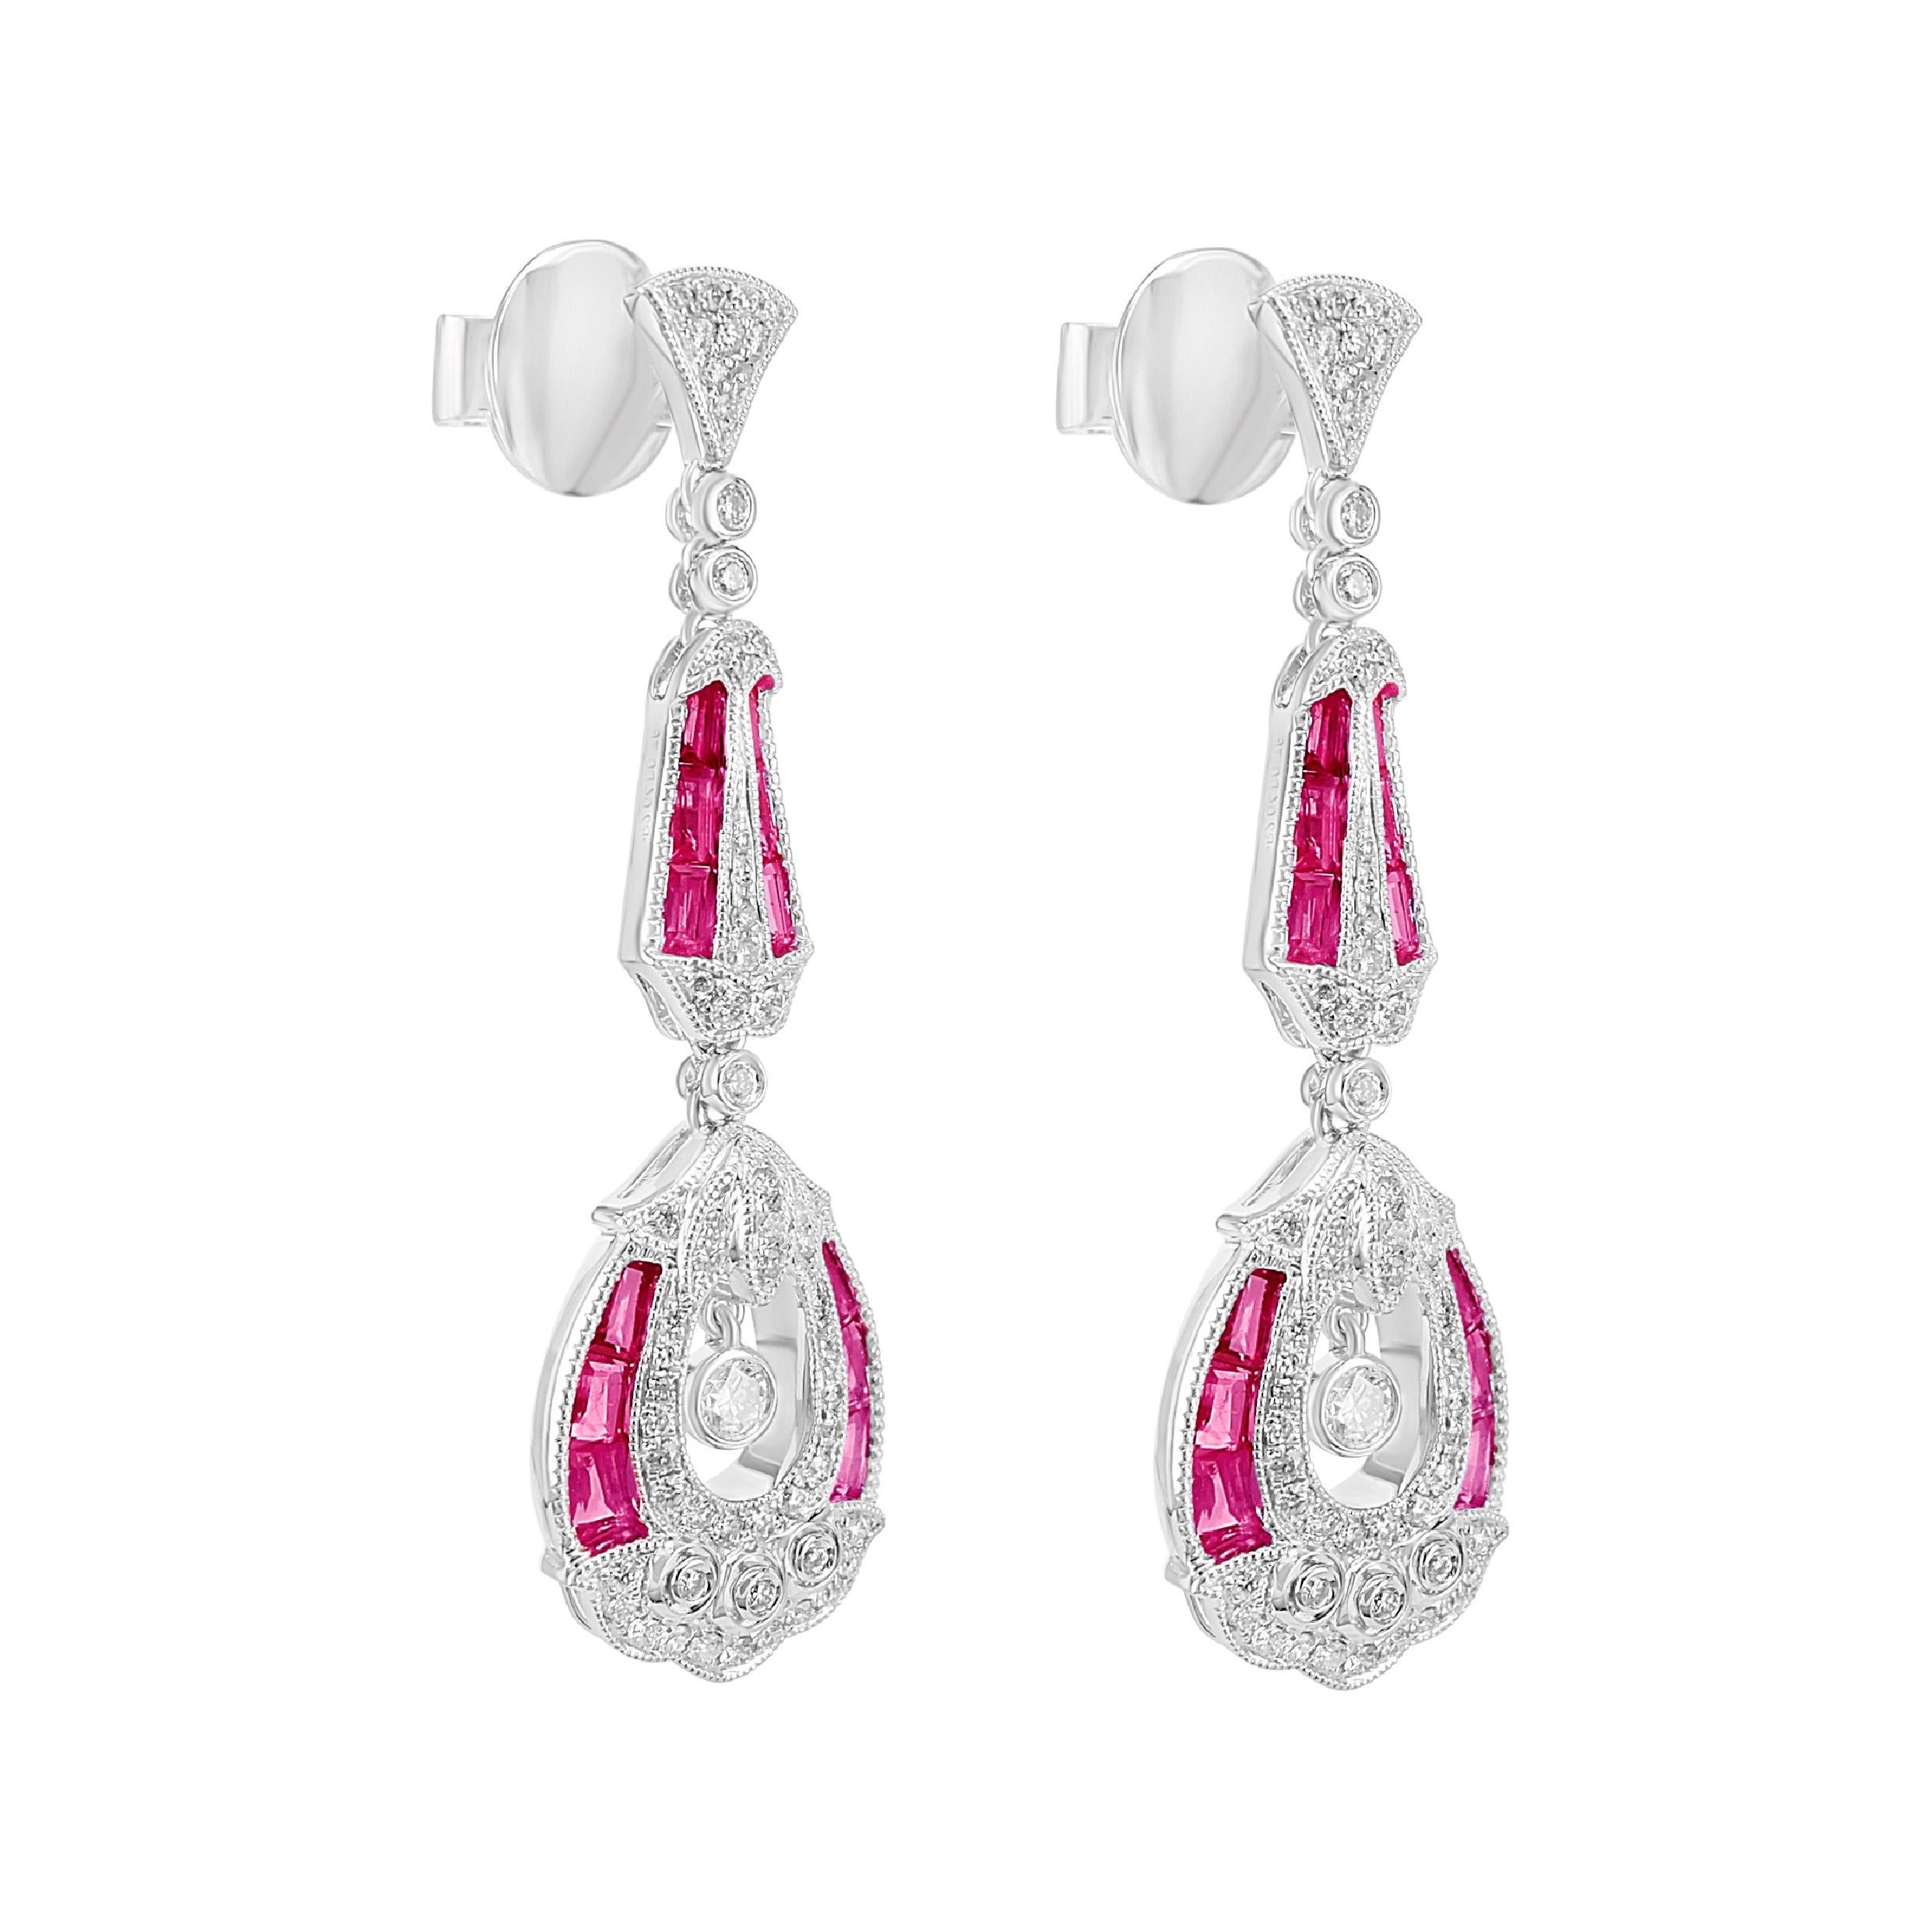 A lovely mix of 2.04 carat of specially cut vivid red ruby and 0.76 carats of white round brilliant diamond are accented together on this art deco style earring. The earring has been inspired by the architecture of France during the 1910-1920